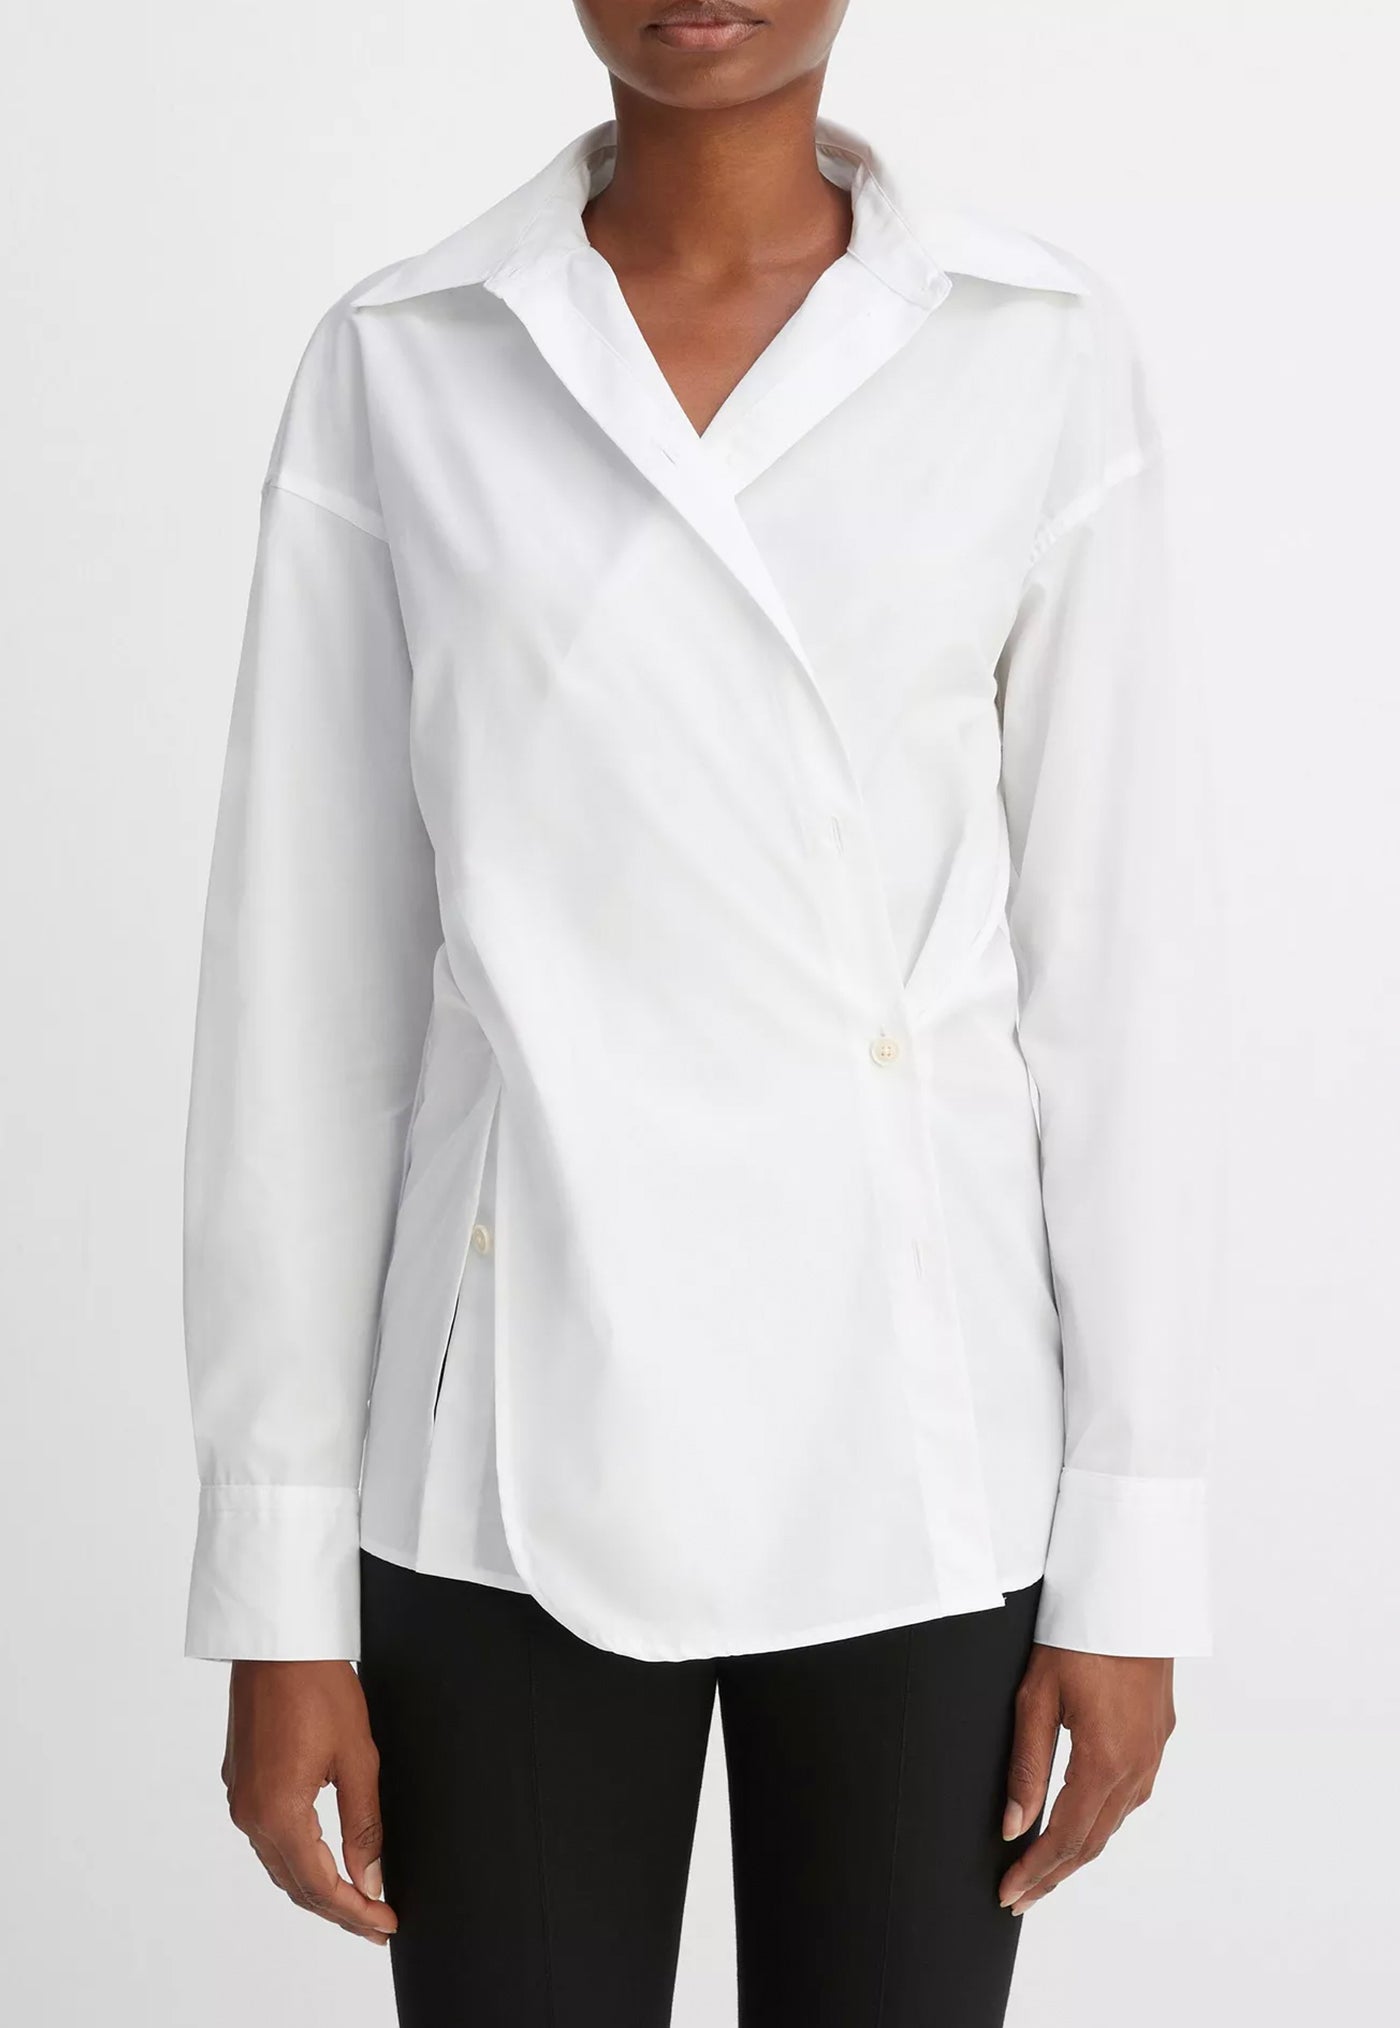 Convertible Button Down Shirt - White sold by Angel Divine